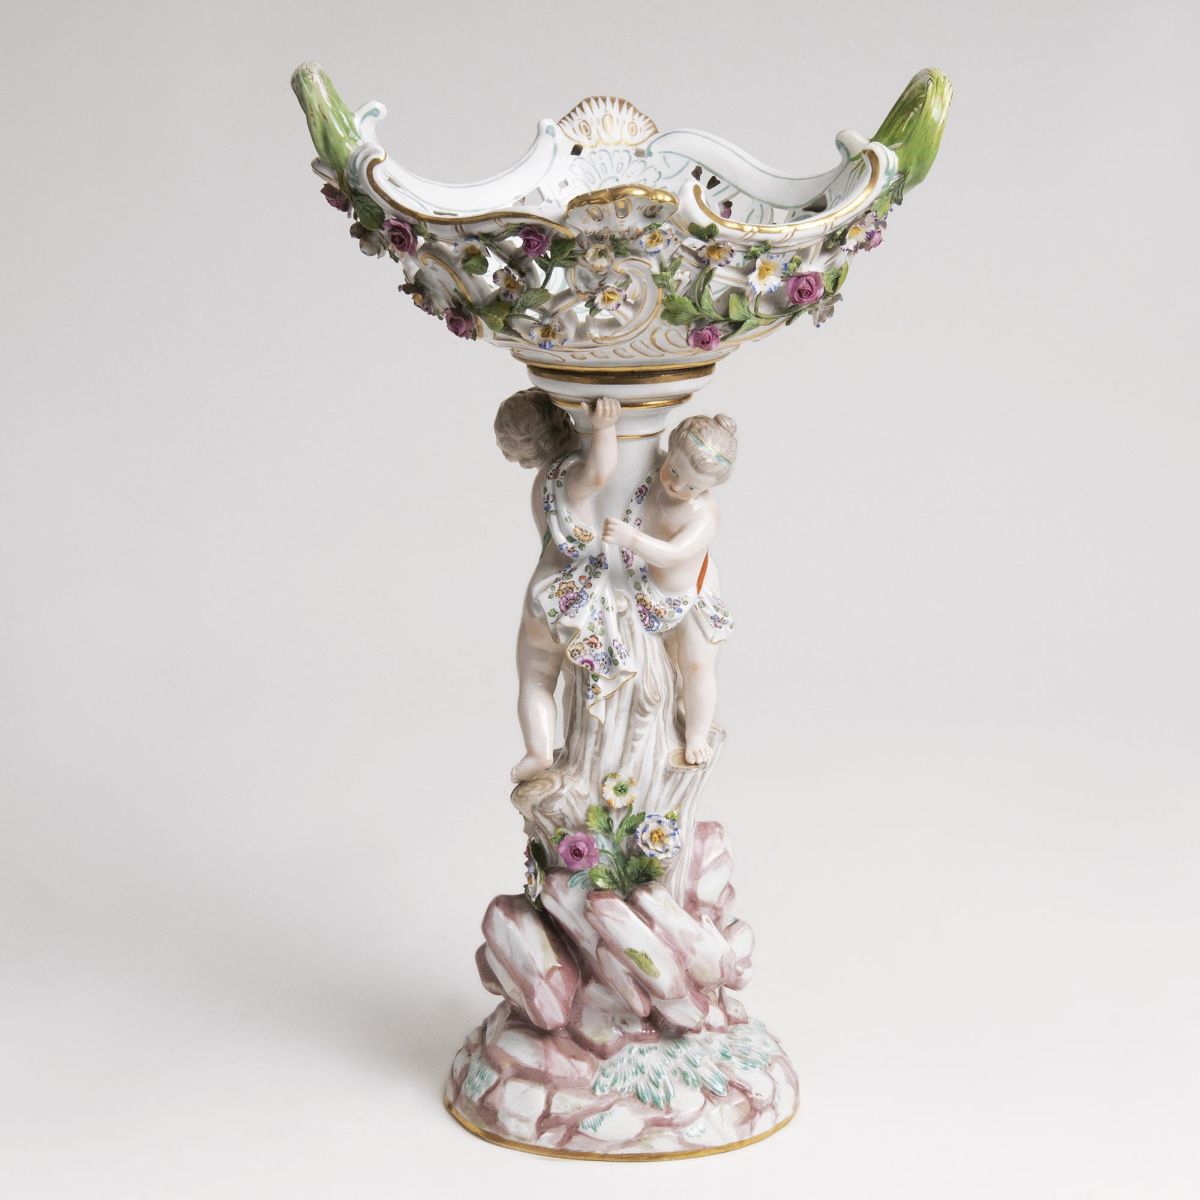 A  Centrepiece with Putti - image 1